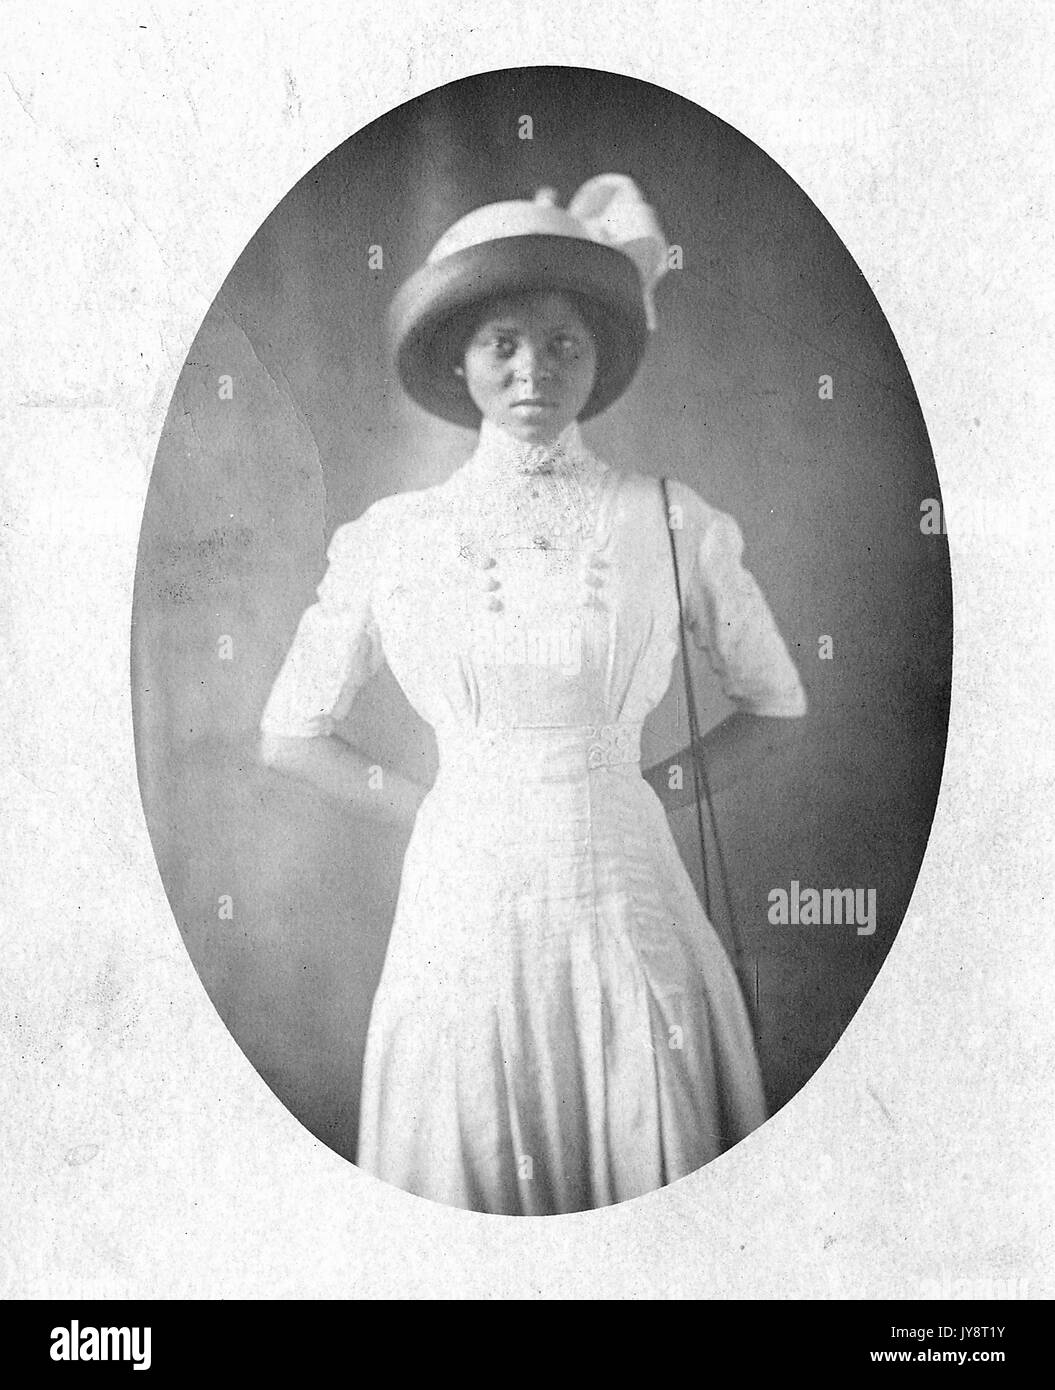 Three quarters length portrait of young African American woman with formal hat and white dress, her hands clasped behind her back, with a serious facial expression, 1915. Stock Photo